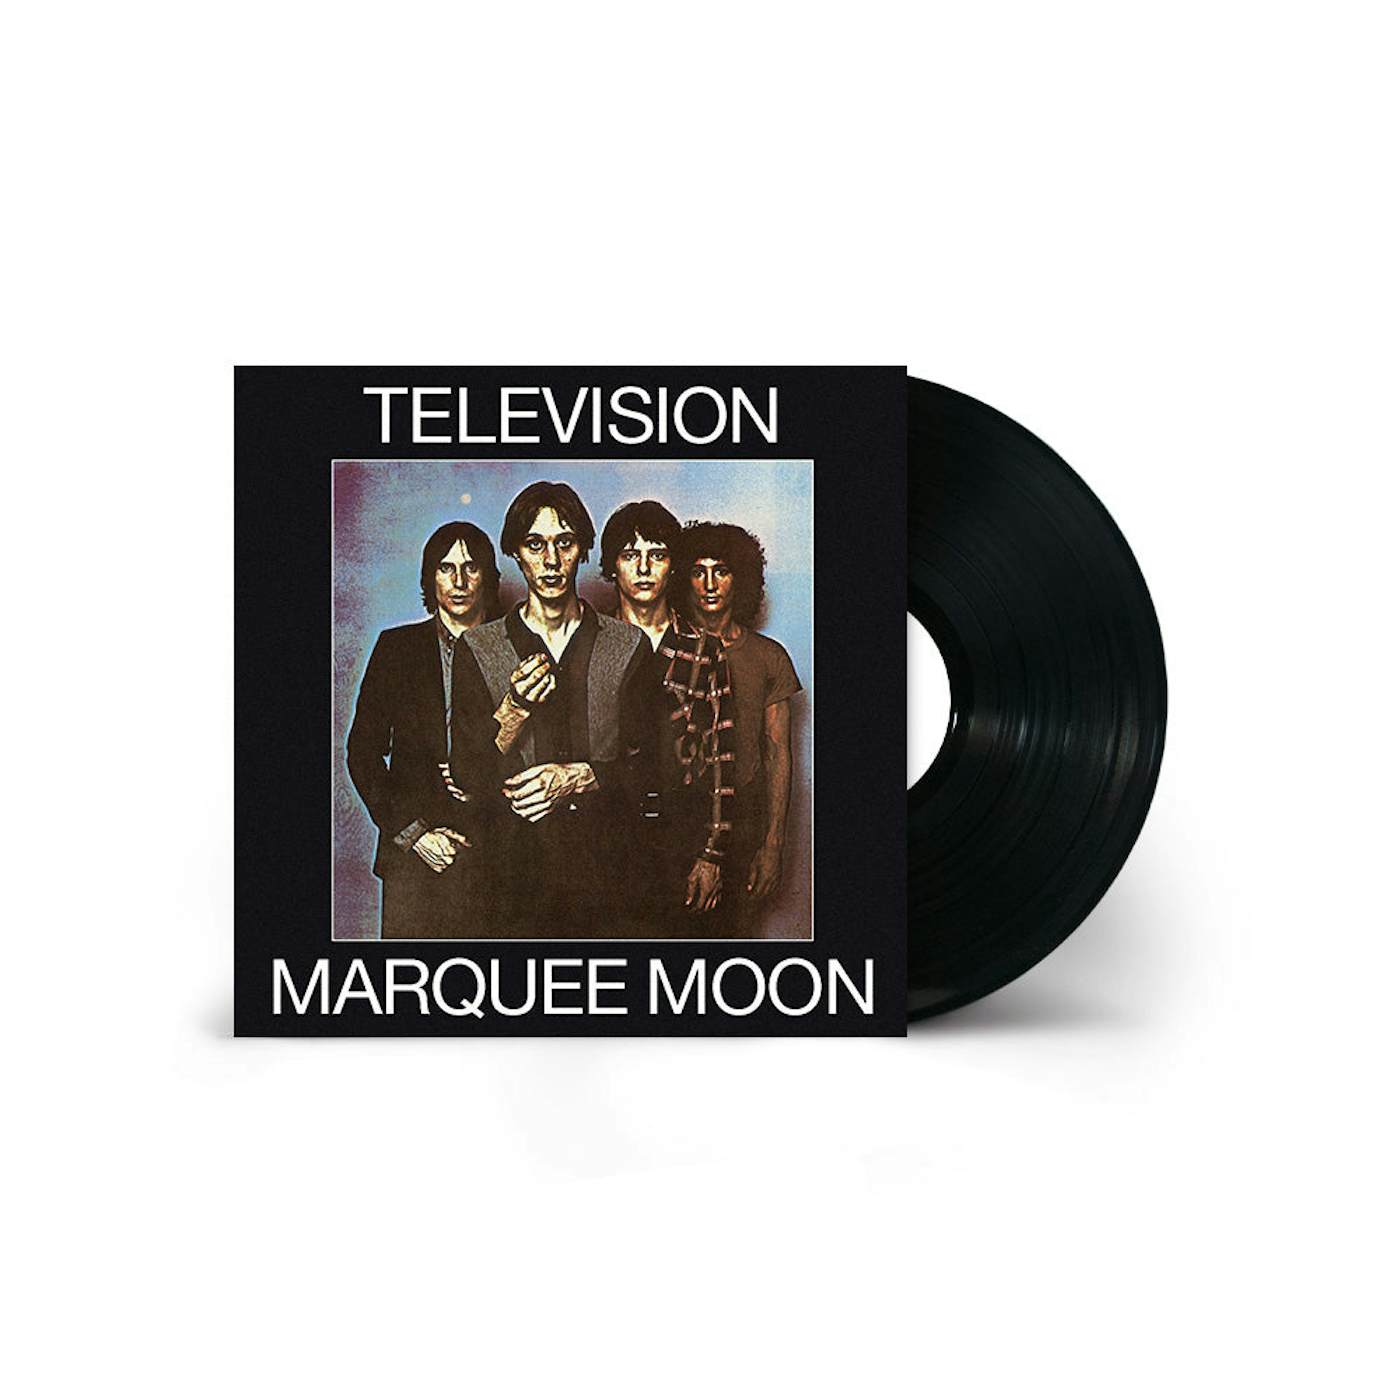 Marquee Moon by Television , Vinyl LP Record Framed and Ready to